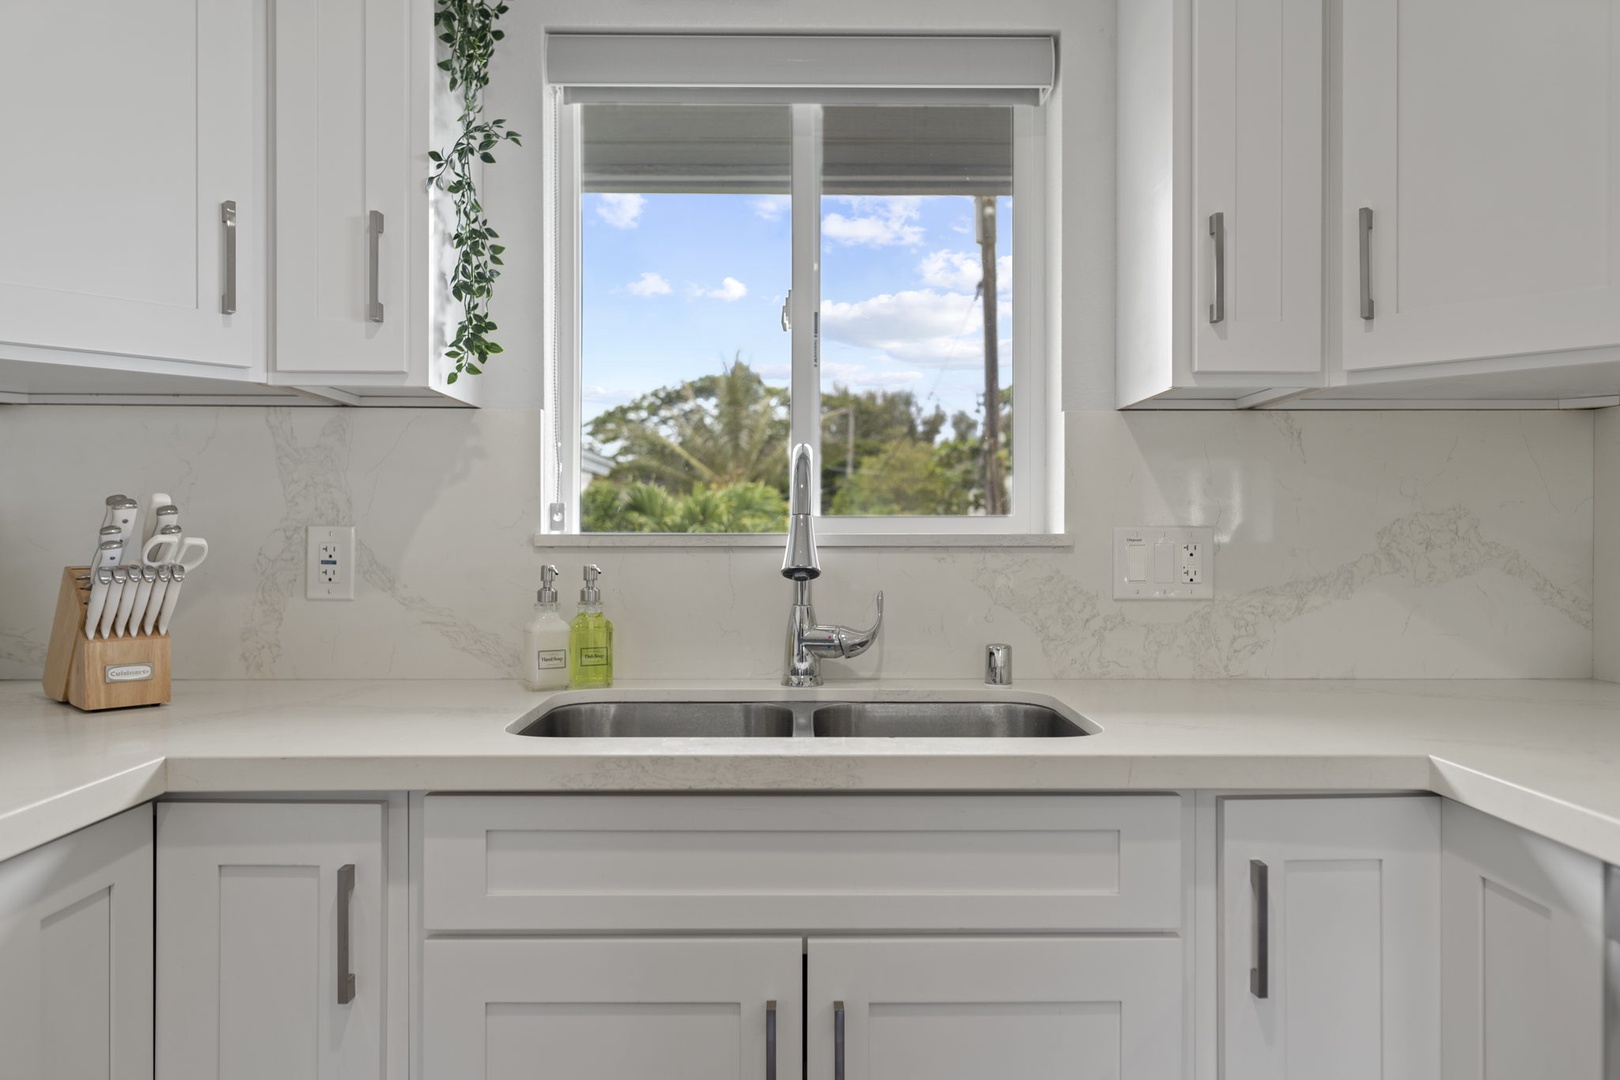 Haleiwa Vacation Rentals, Hale Nalu - You can even enjoy beautiful island views from the window above the kitchen sink